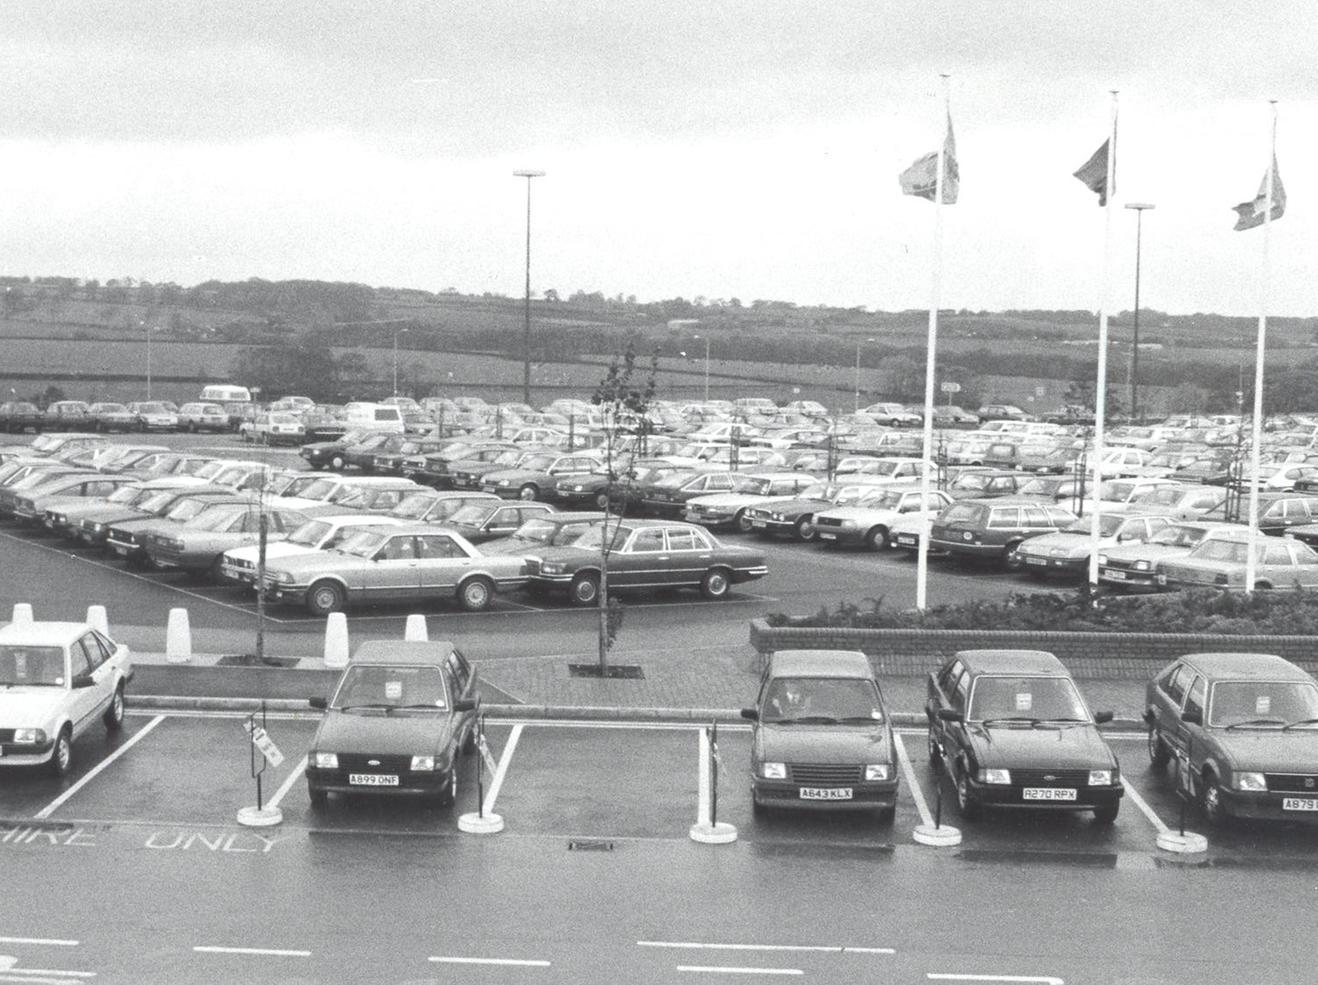 The extended car park at Leeds Bradford Airport proved a soaraway success.